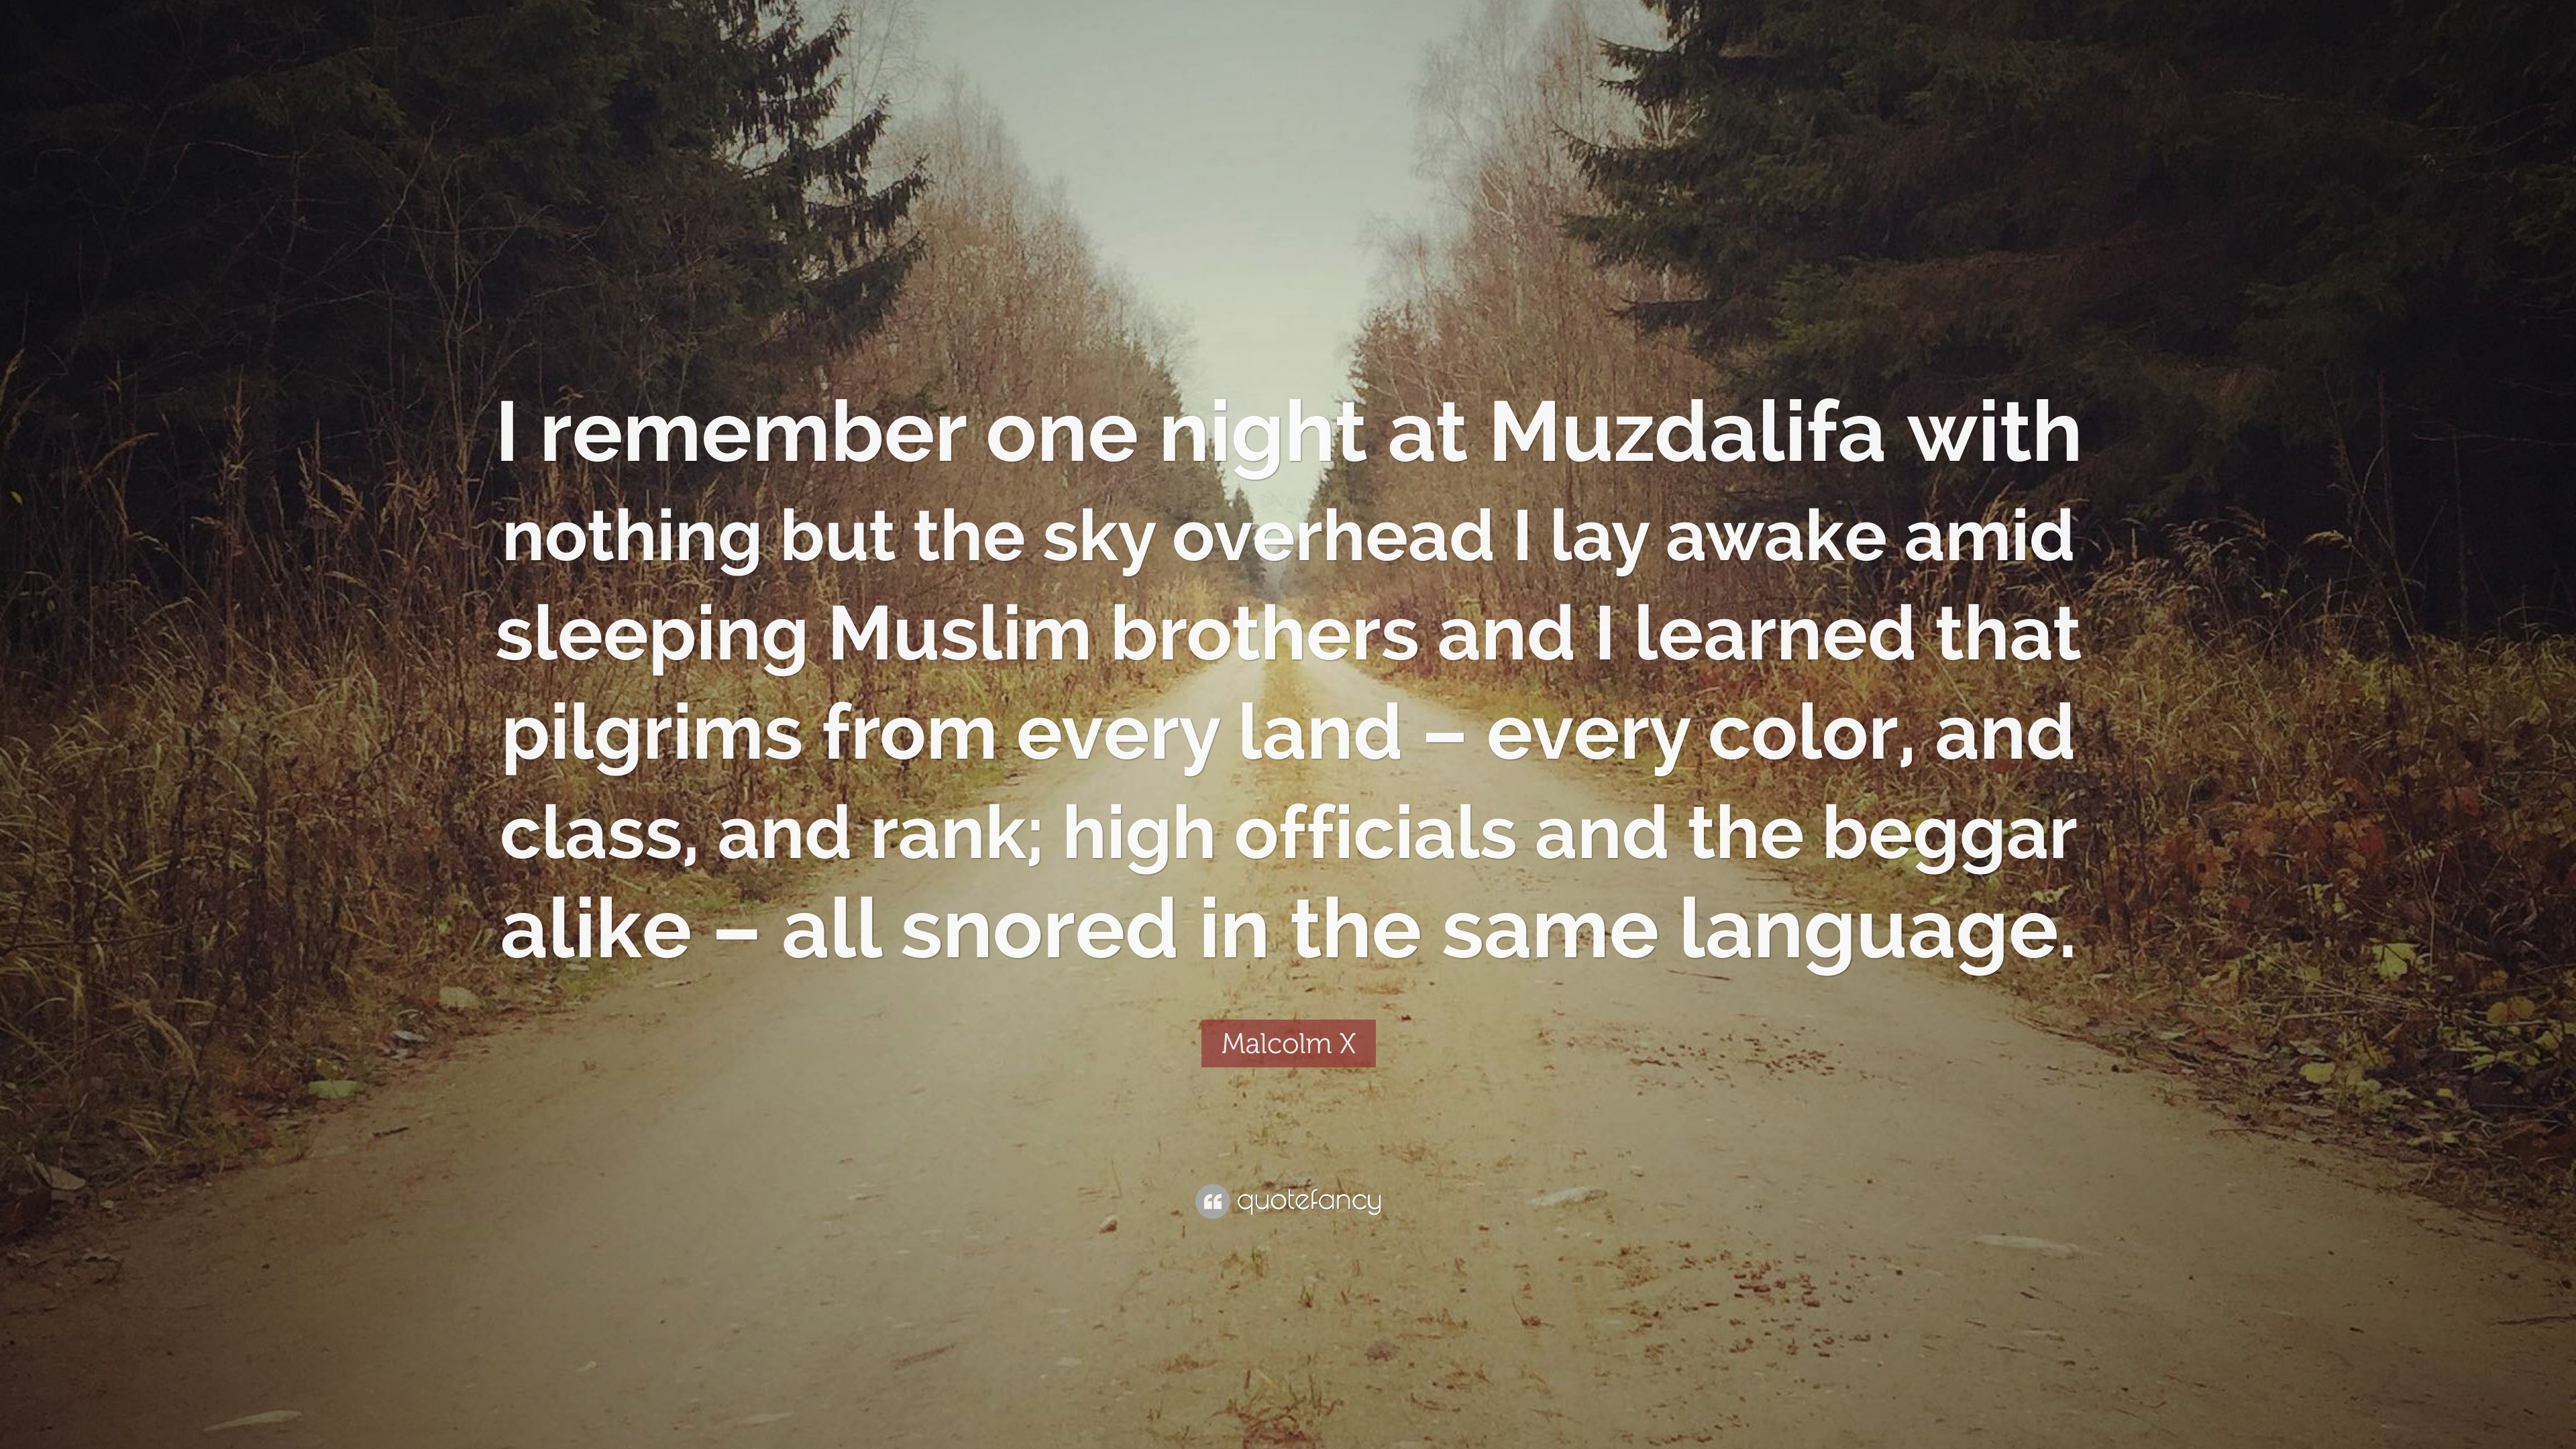 Malcolm X Quote: "I remember one night at Muzdalifa with ...